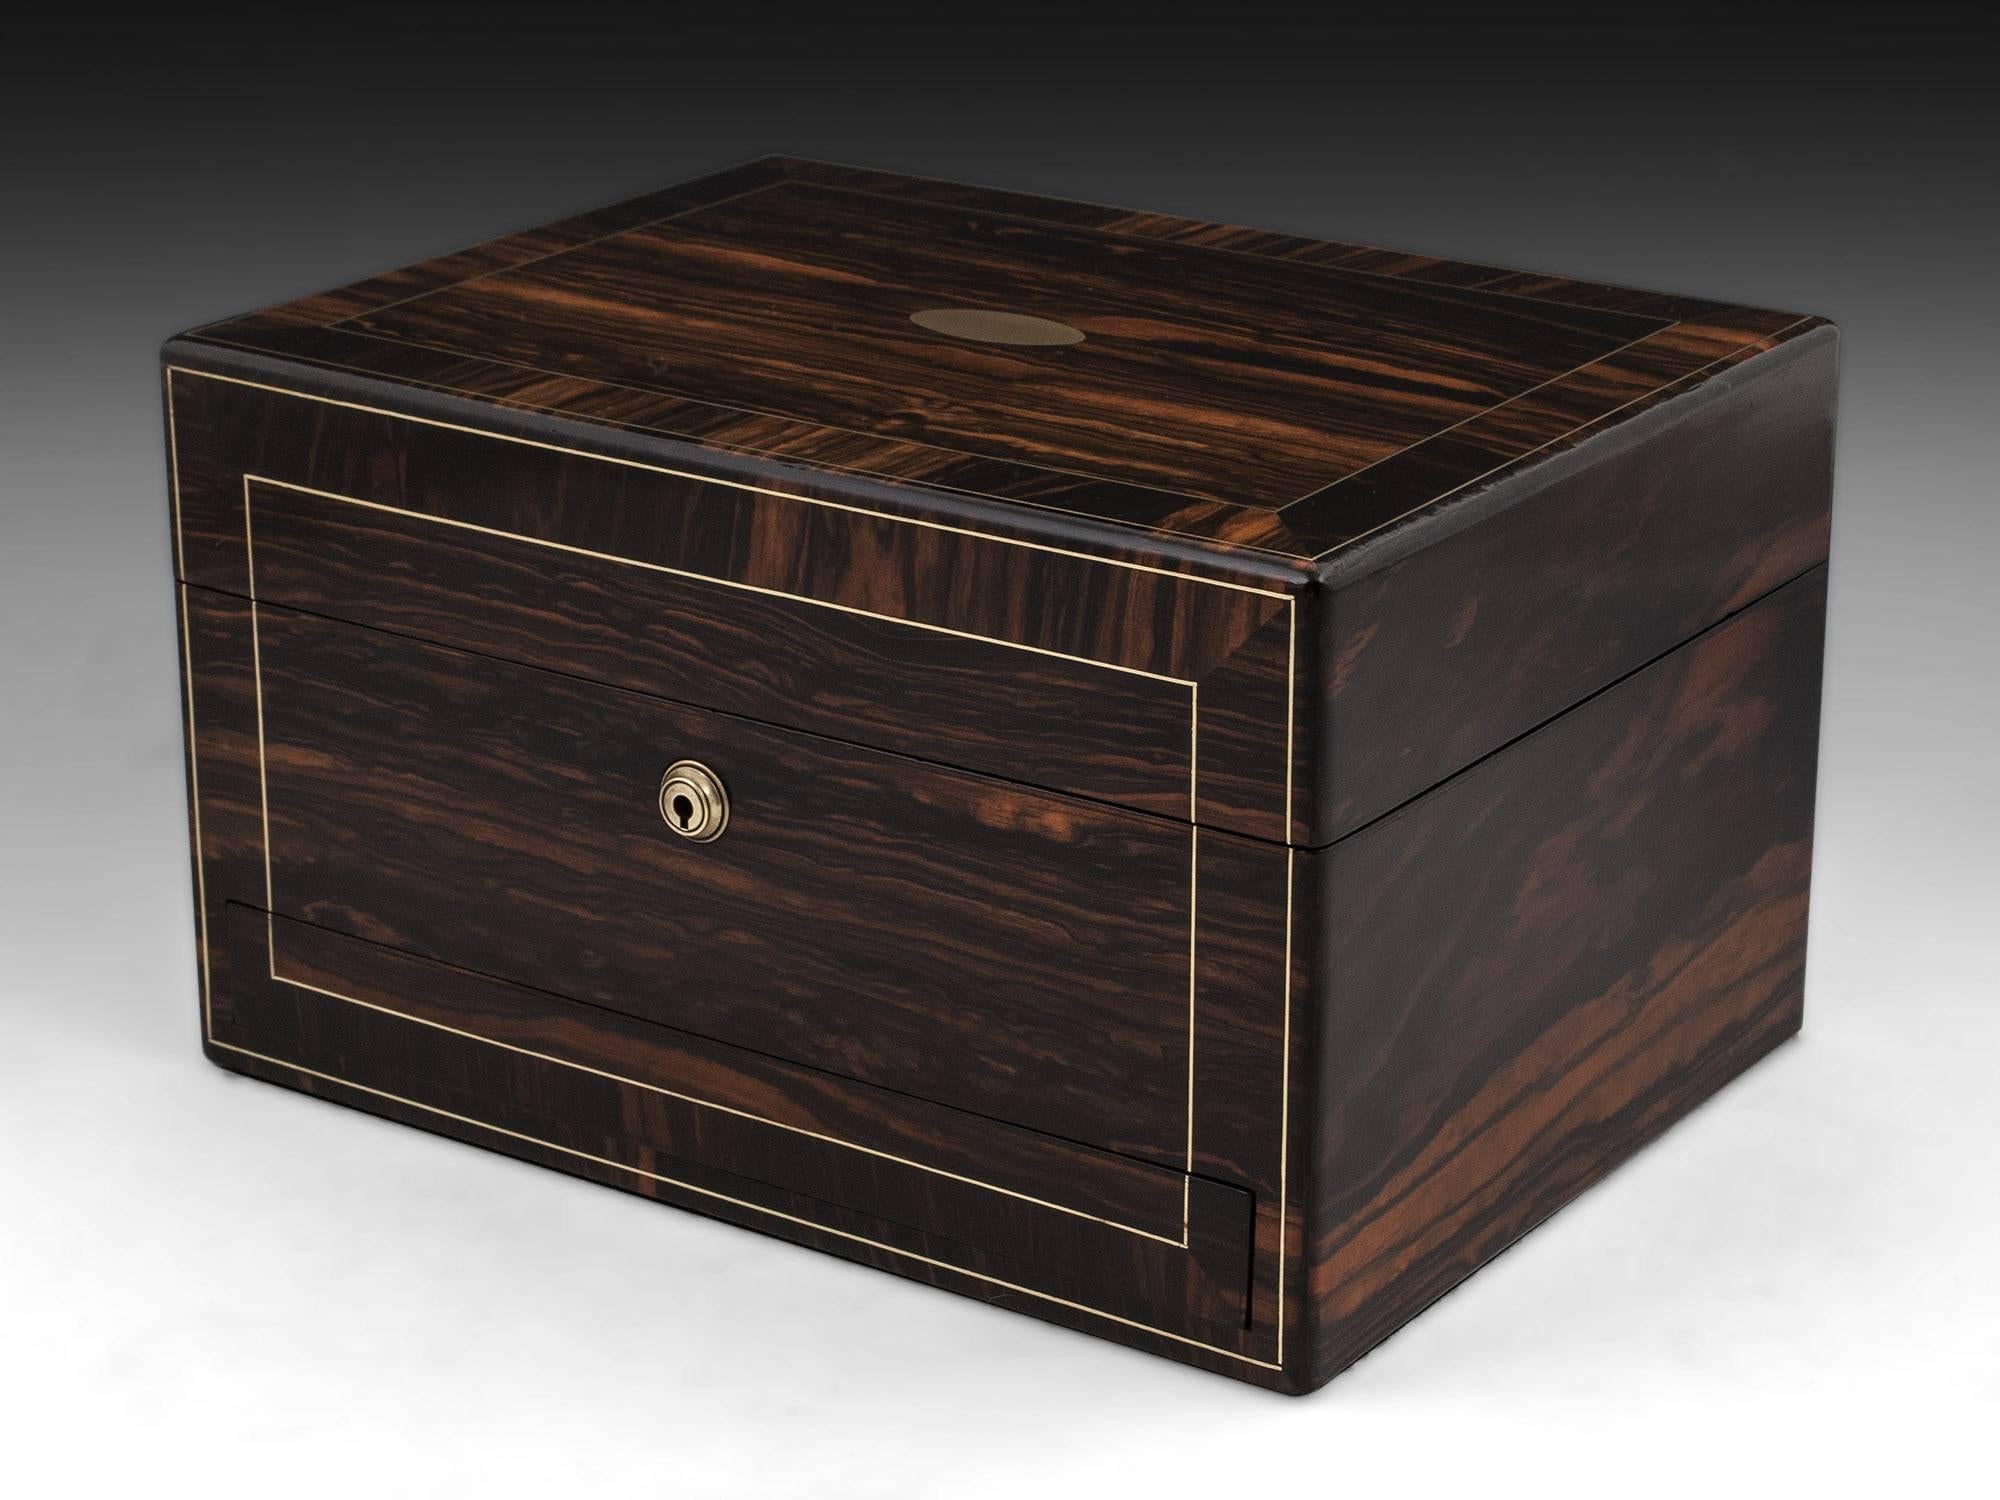 Antique jewelry box veneered in exotic coromandel with fine double brass stringing separating the fabulous crosscut coromandel veneers on the front and top, with vacant brass initial plate and escutcheon. 

Opening the coromandel jewelry box